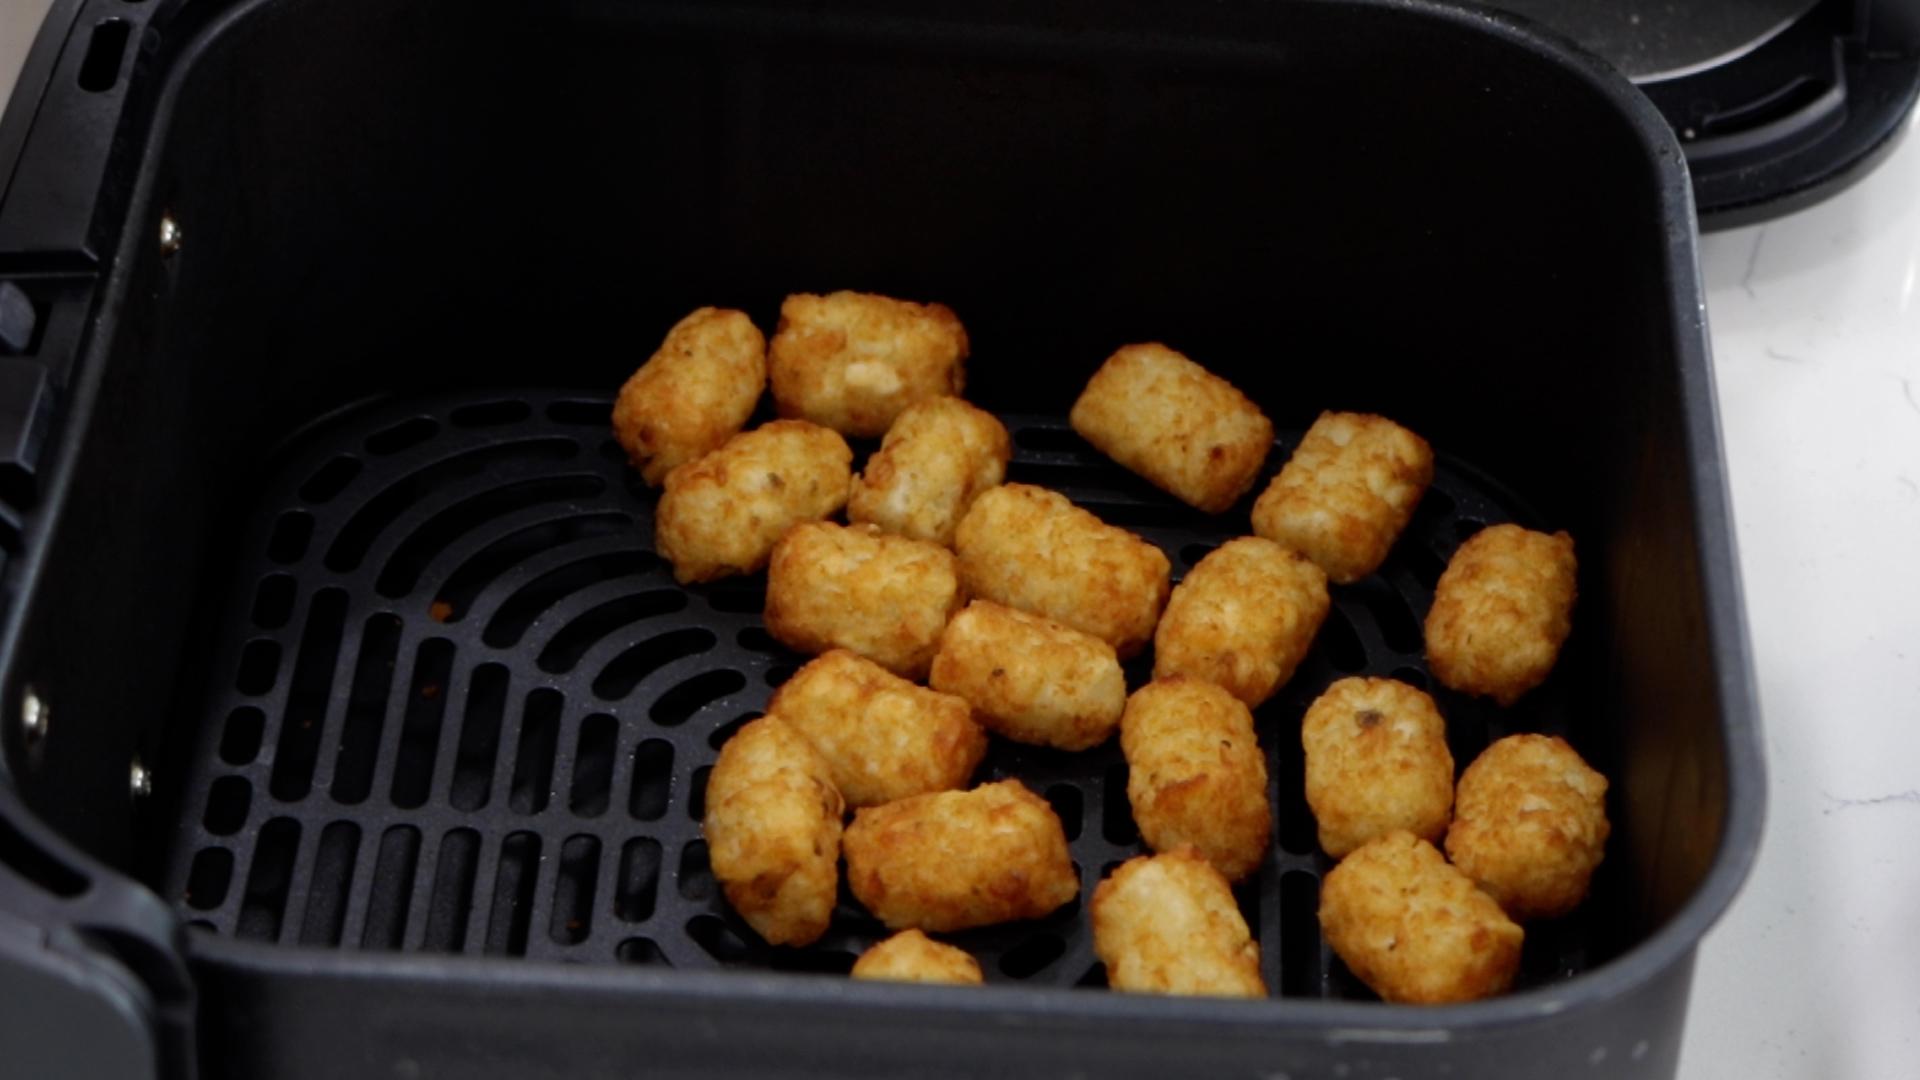 How to cook frozen tater tots in air fryer Copy 01.00_01_44_06.Still003.jpg